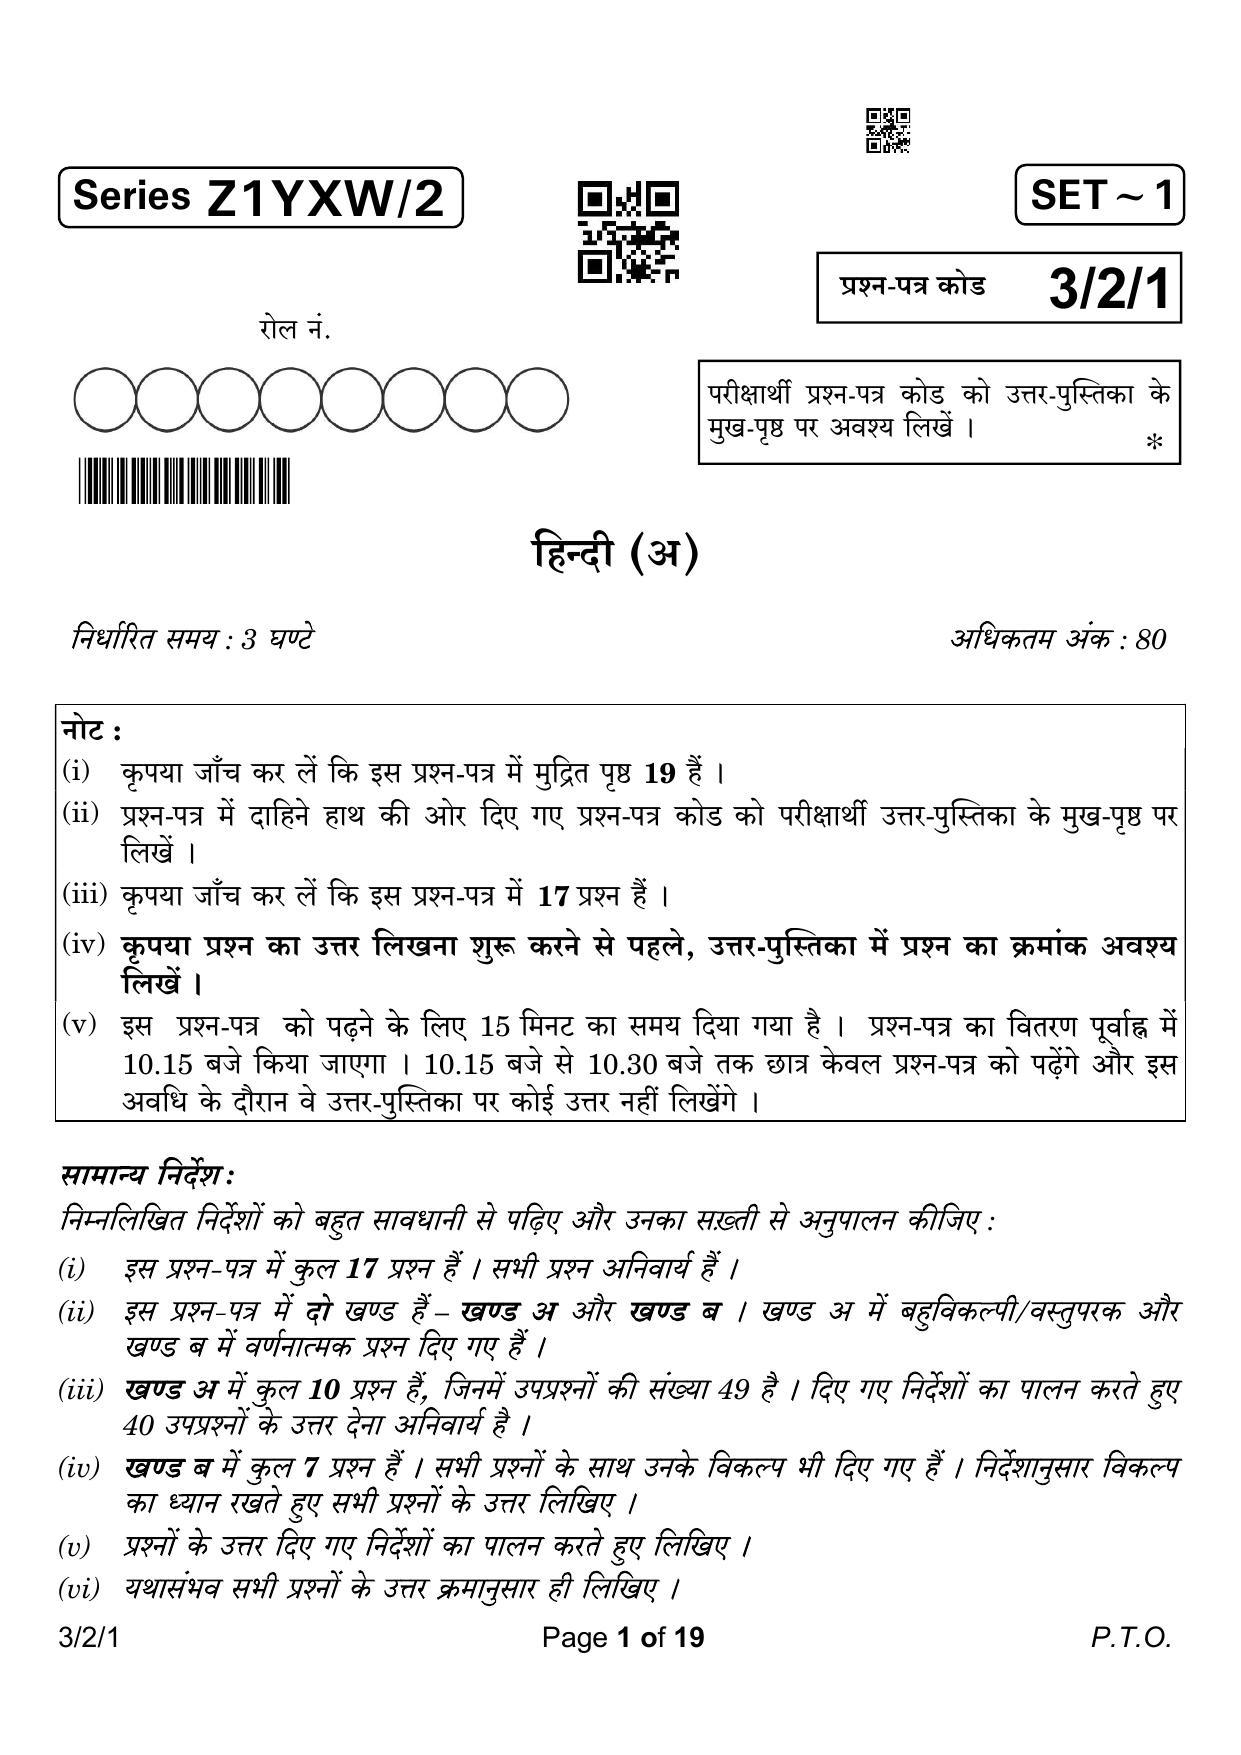 CBSE Class 10 3-2-1 Hindi A 2023 Question Paper - Page 1